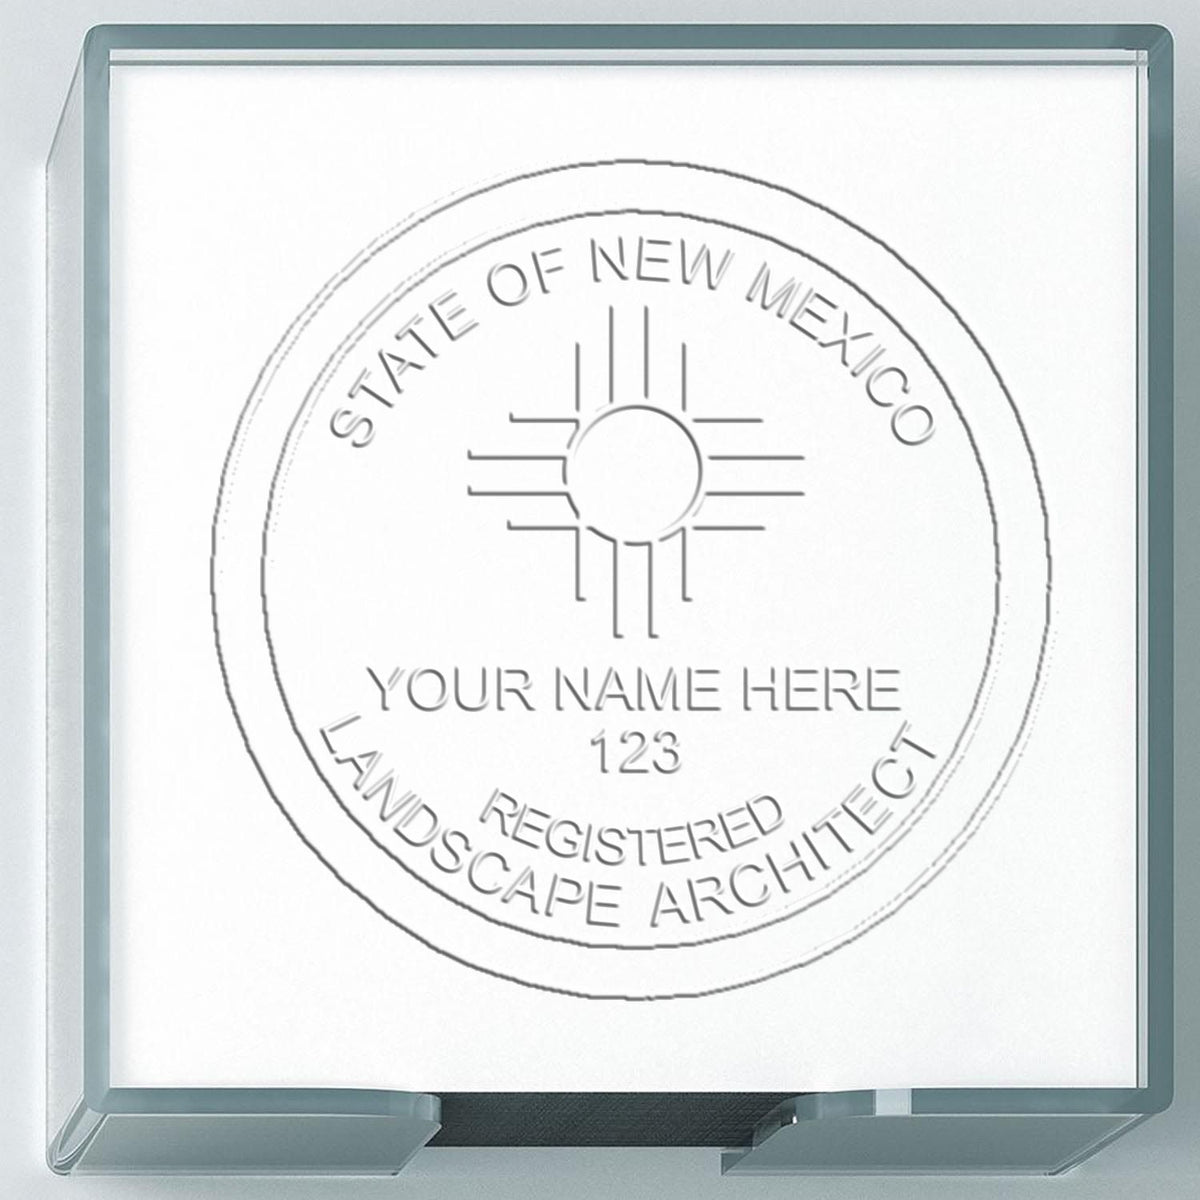 A photograph of the Hybrid New Mexico Landscape Architect Seal stamp impression reveals a vivid, professional image of the on paper.